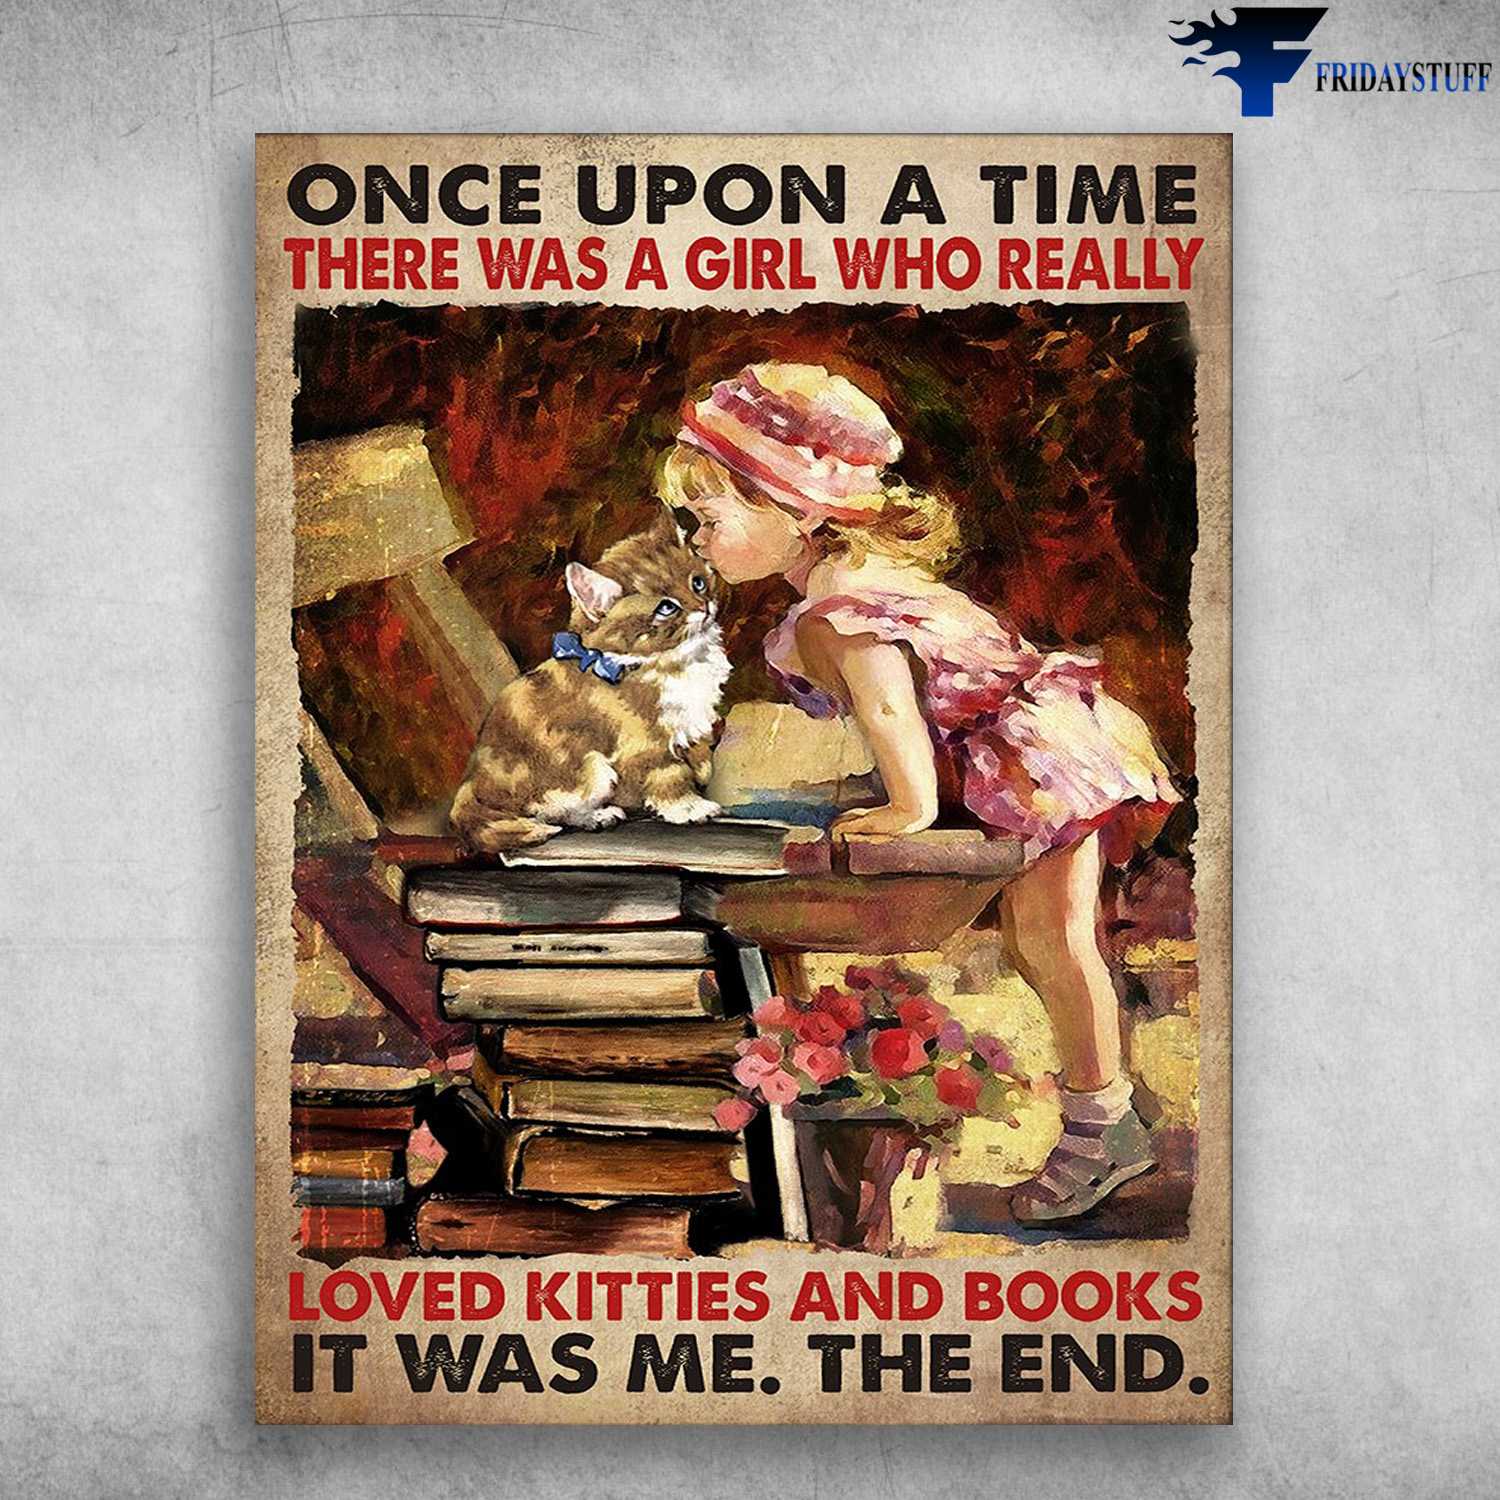 Cat And Book, Book Lover - Once Upon A Time, There Was A Girl Who Really, Loved Kitties And Books, It Was Me, The End